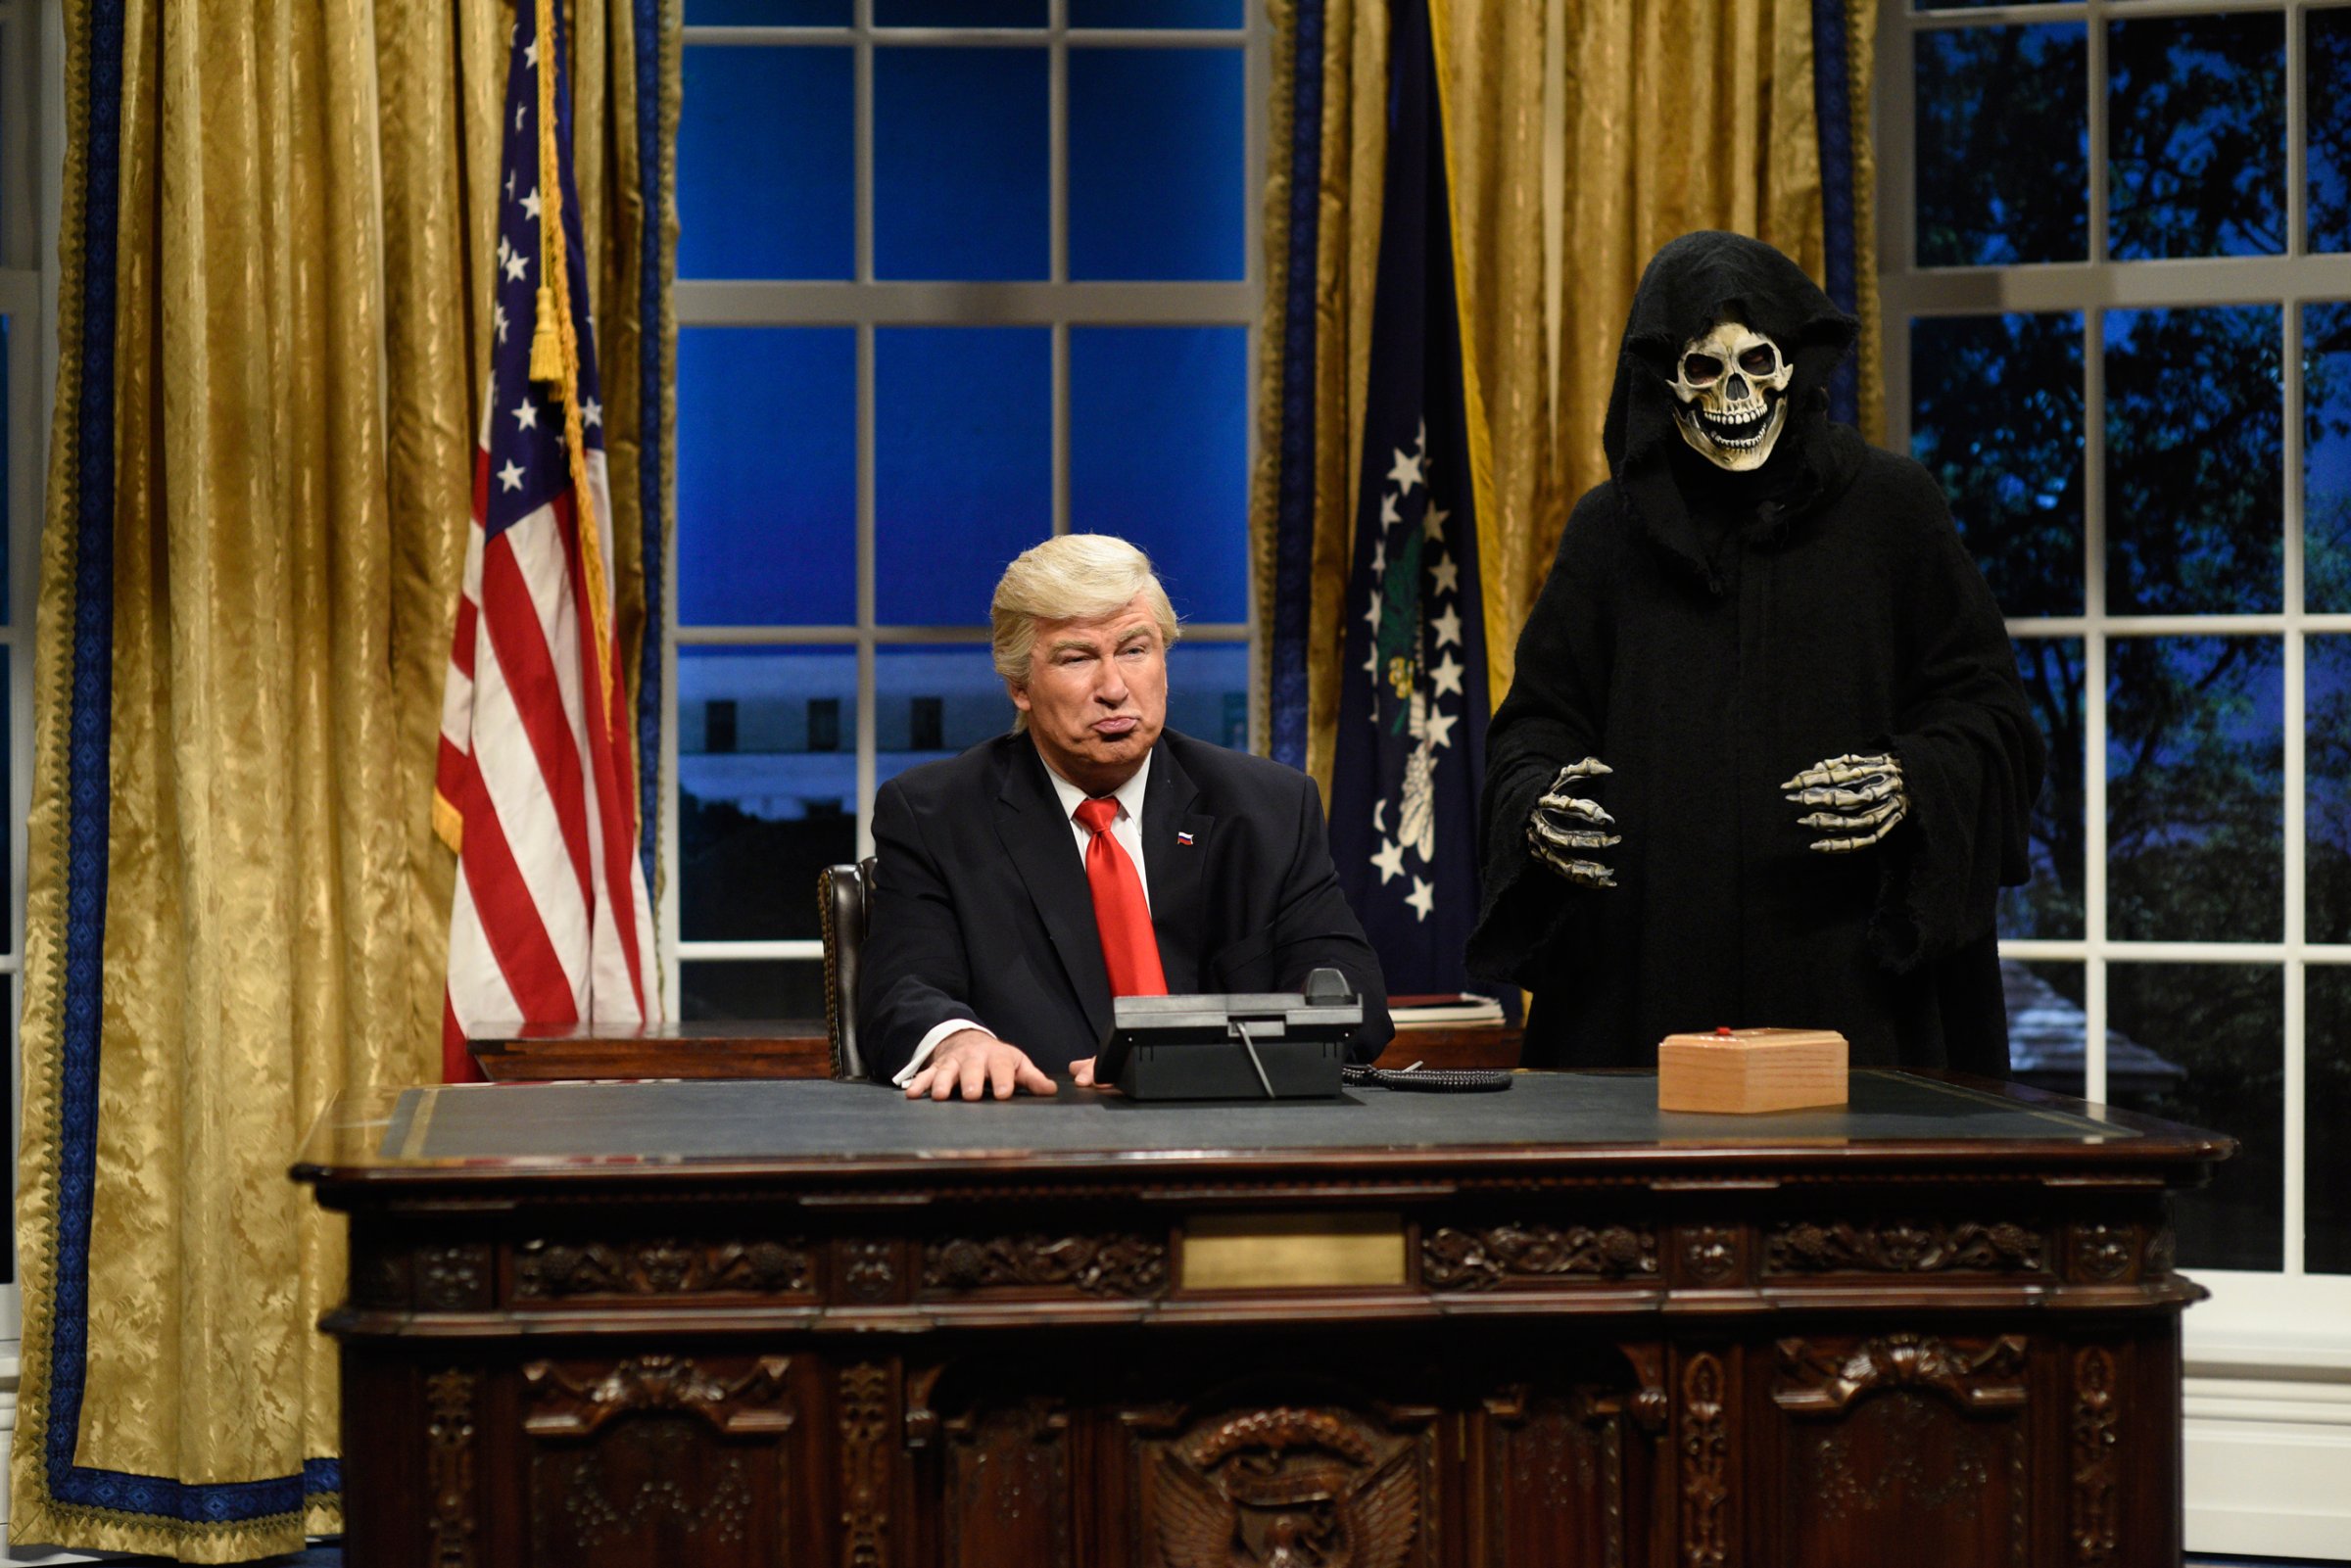 SATURDAY NIGHT LIVE -- "Kristen Stewart" Episode 1717 -- Pictured: (l-r) Alec Baldwin as President Donald J. Trump, Mikey Day as advisor Steve Bannon during the Oval Office Cold Open on February 4th, 2017 -- (Photo by: Will Heath/NBC/NBCU Photo Bank via Getty Images)